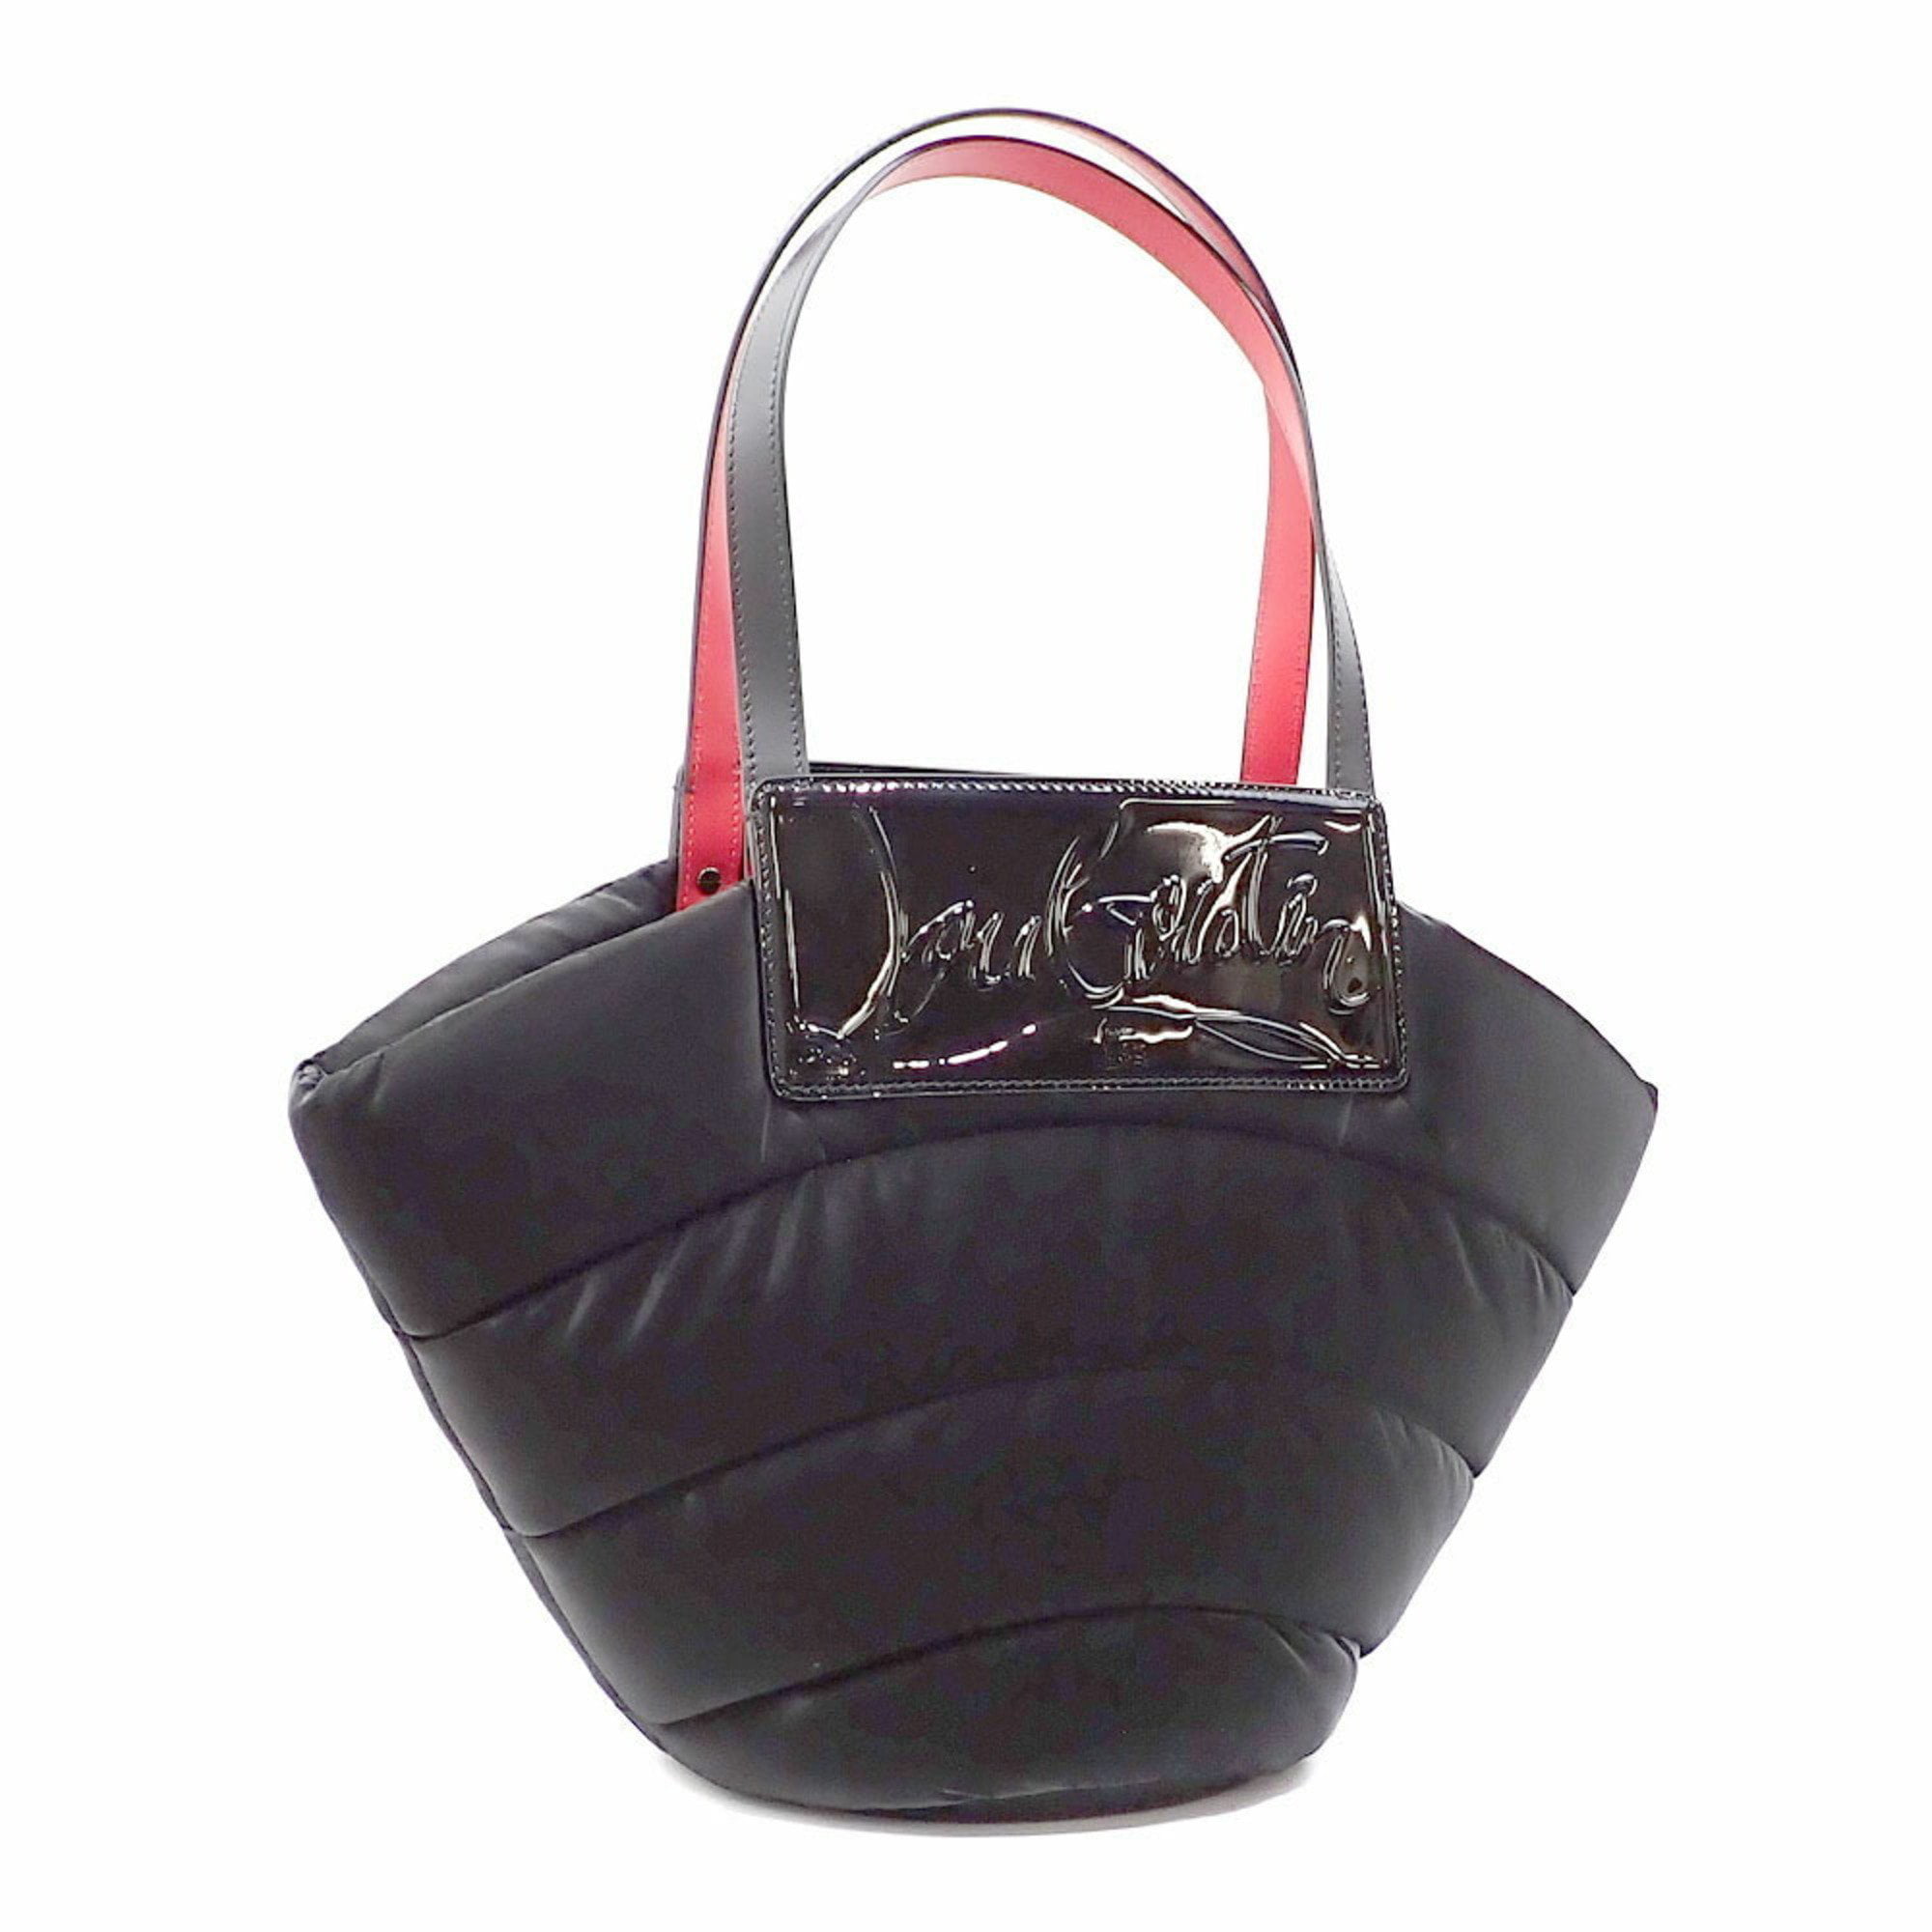 Authenticated Used Christian Louboutin Tote Bag Ladies Black Red Velvet  1225162B260 